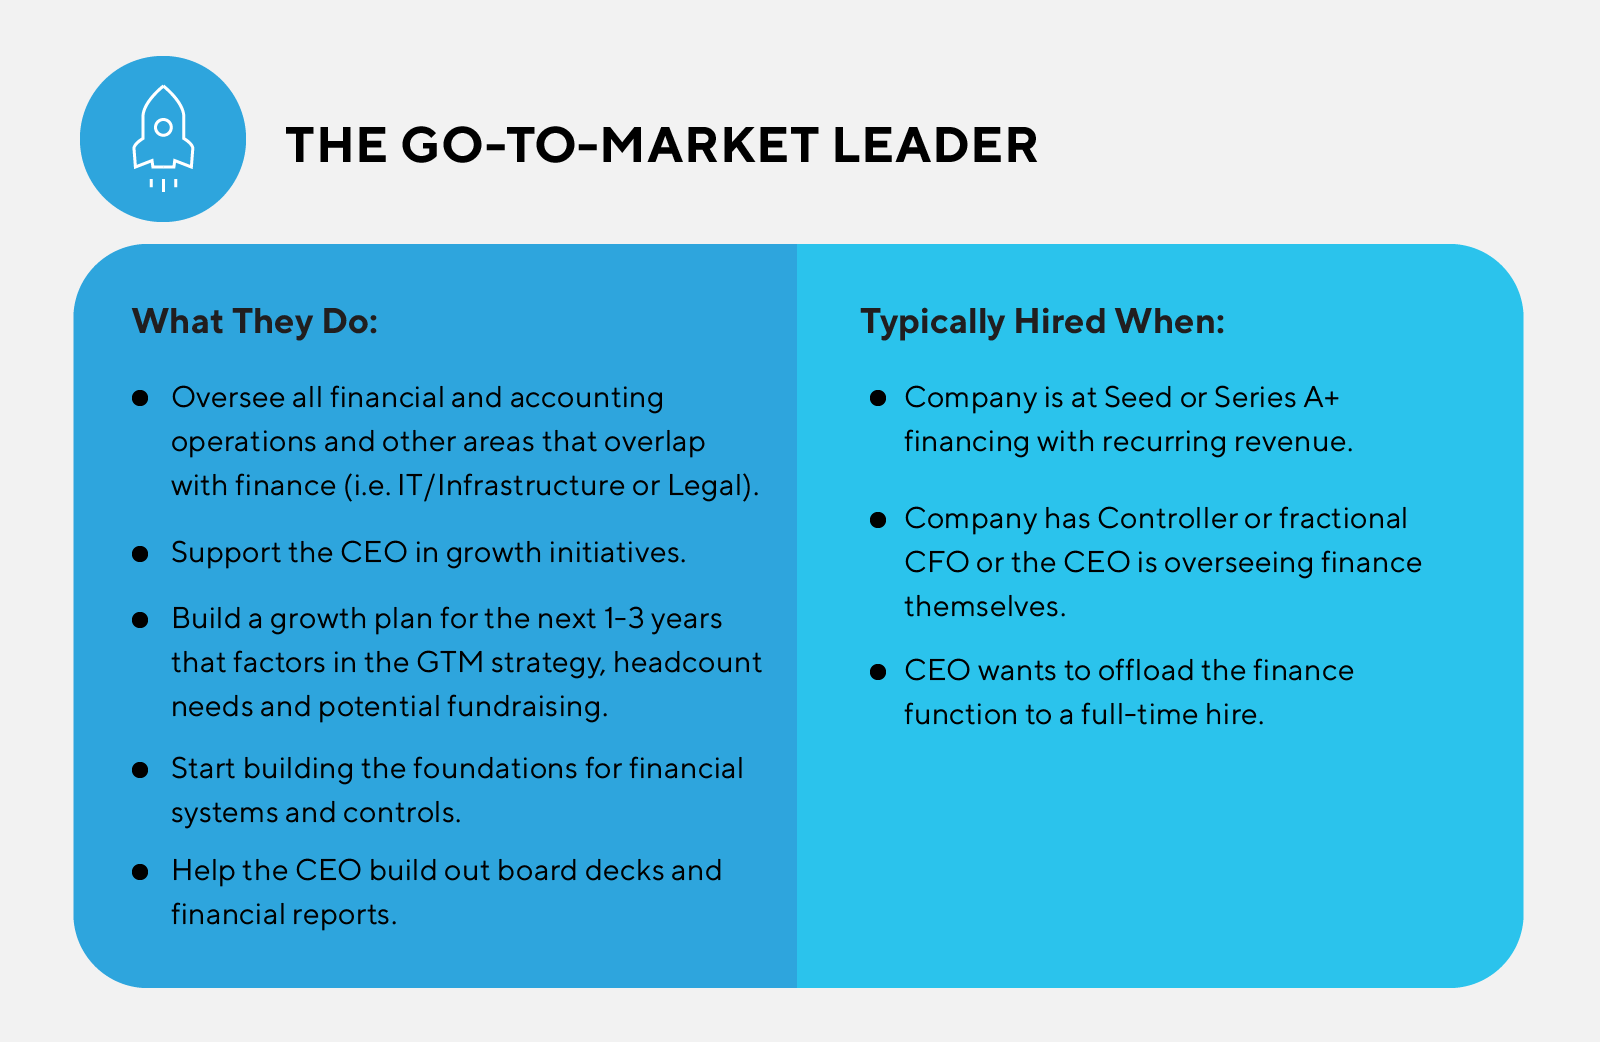 The Go-to-Market Leader Chart